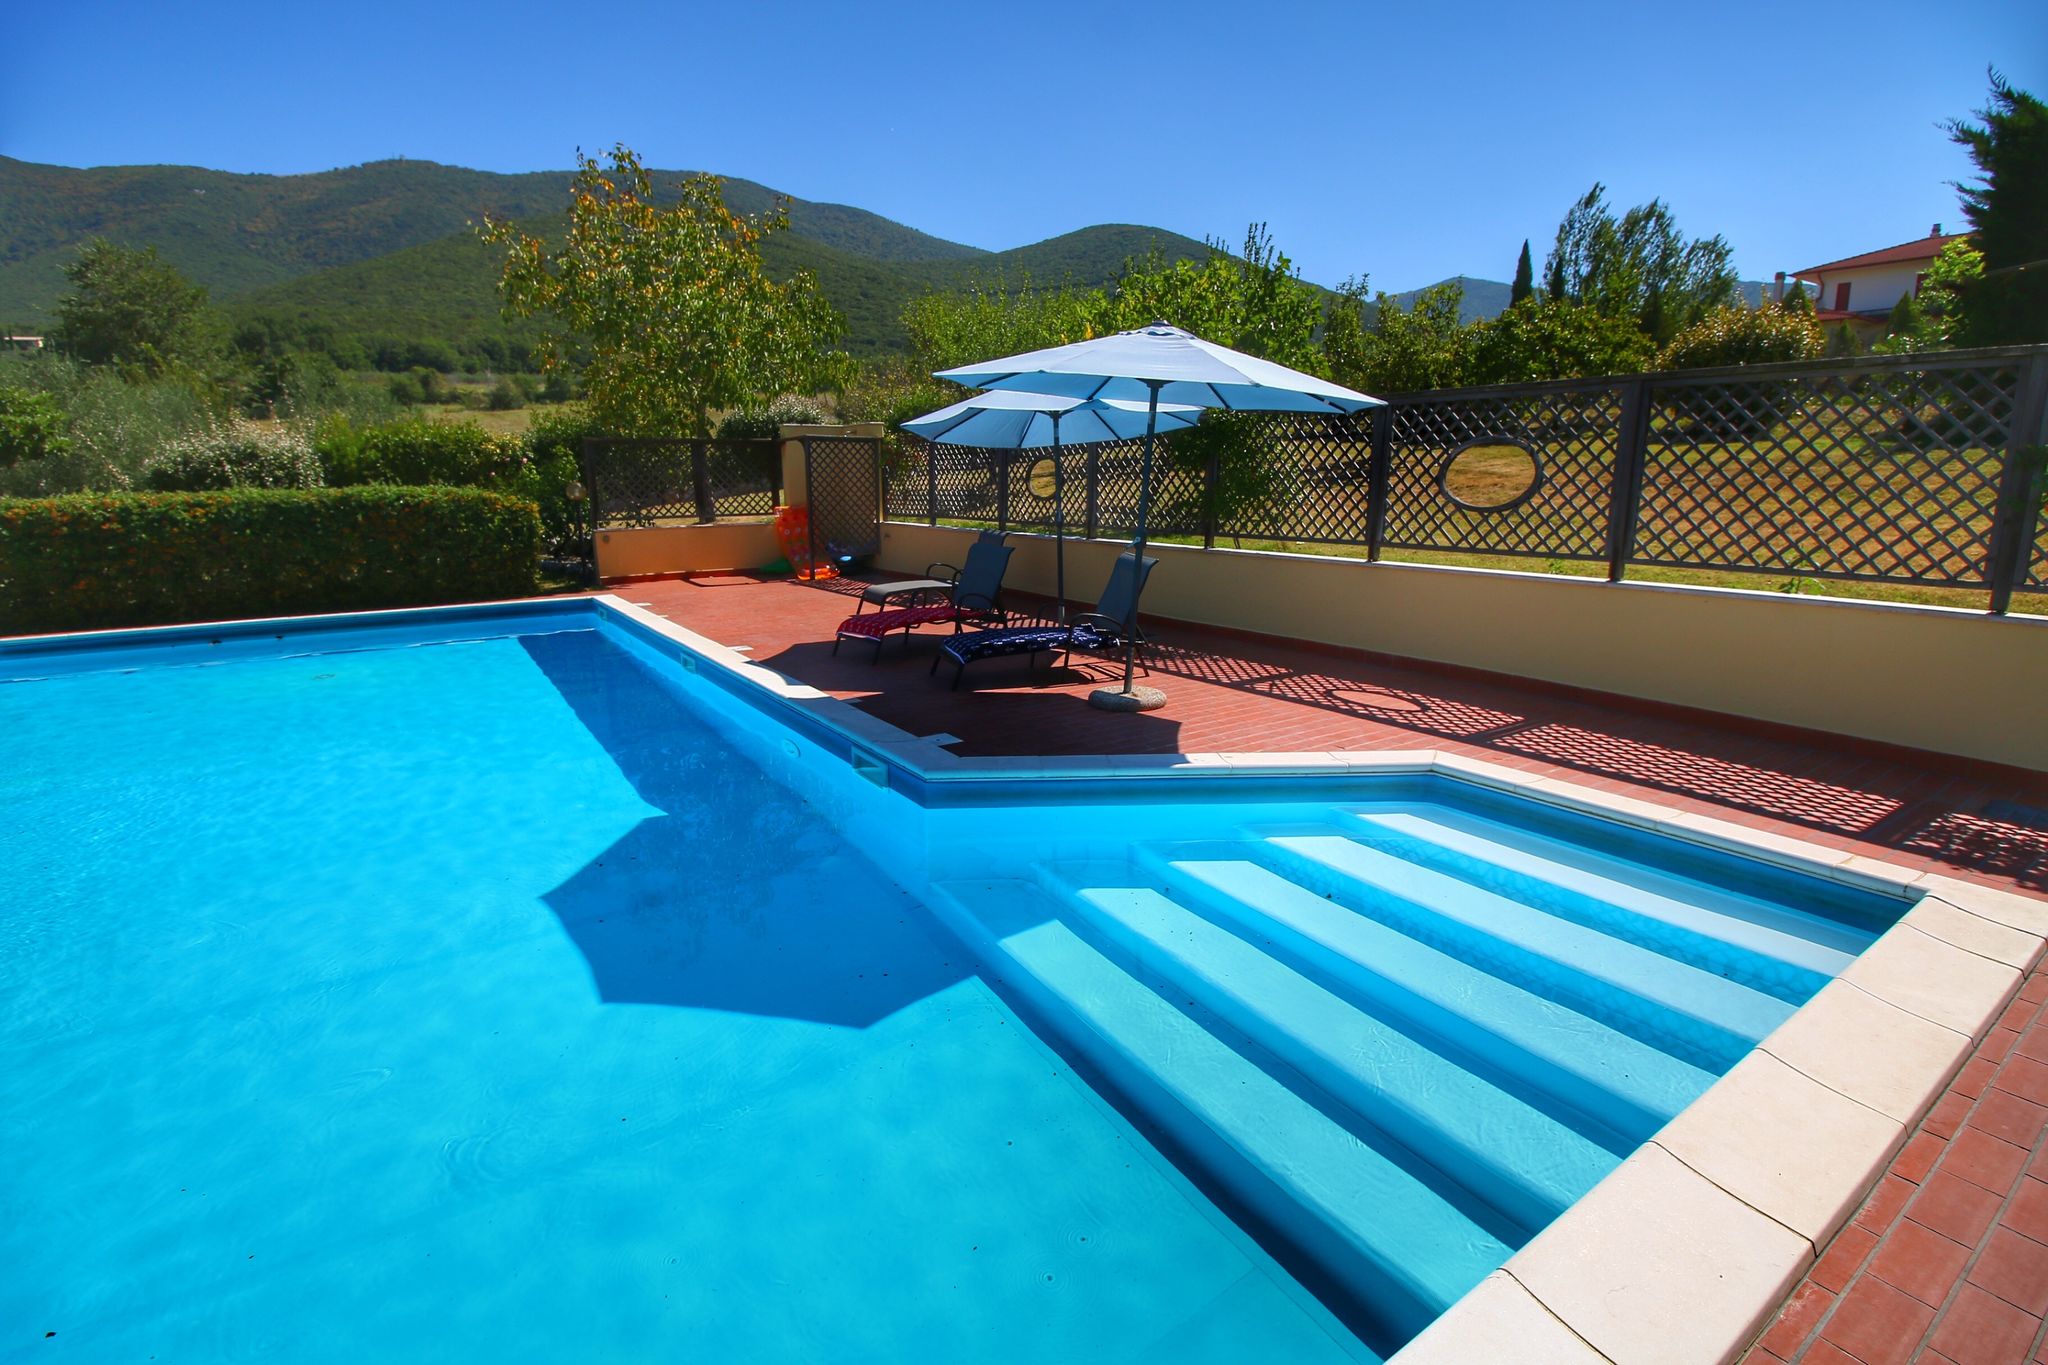 Villa with private pool in the hills, beautiful views and wonderful nature